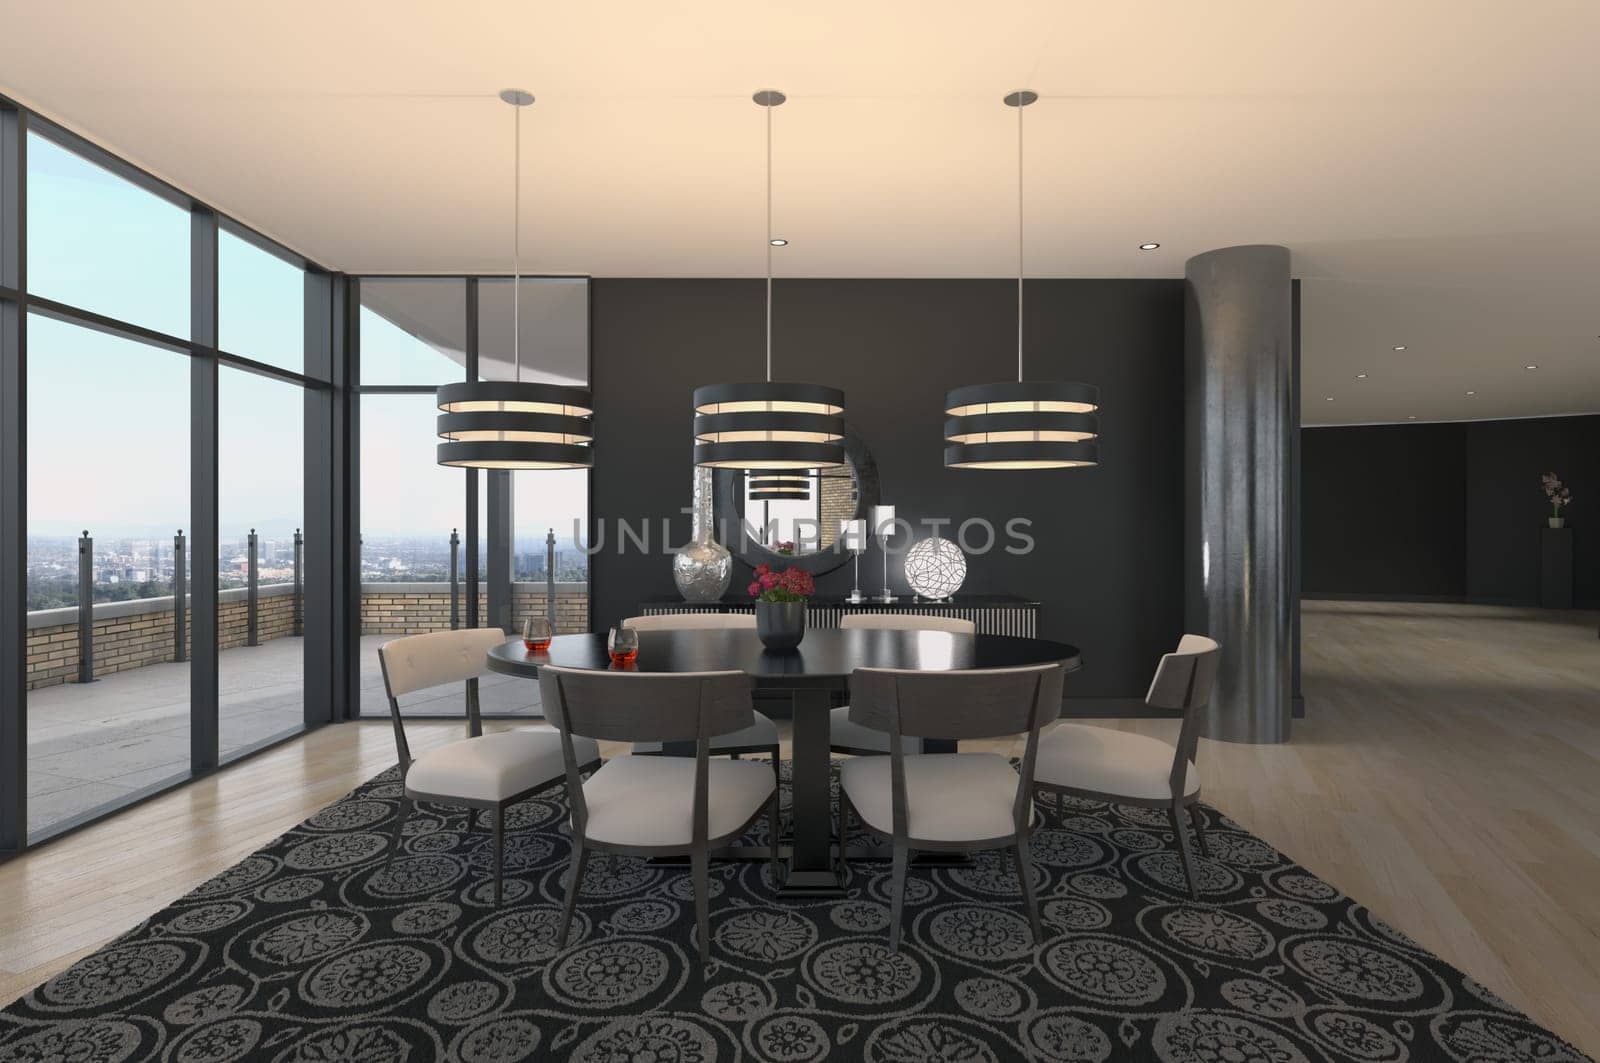 3d Illustration of modern dining room interior in a luxury house